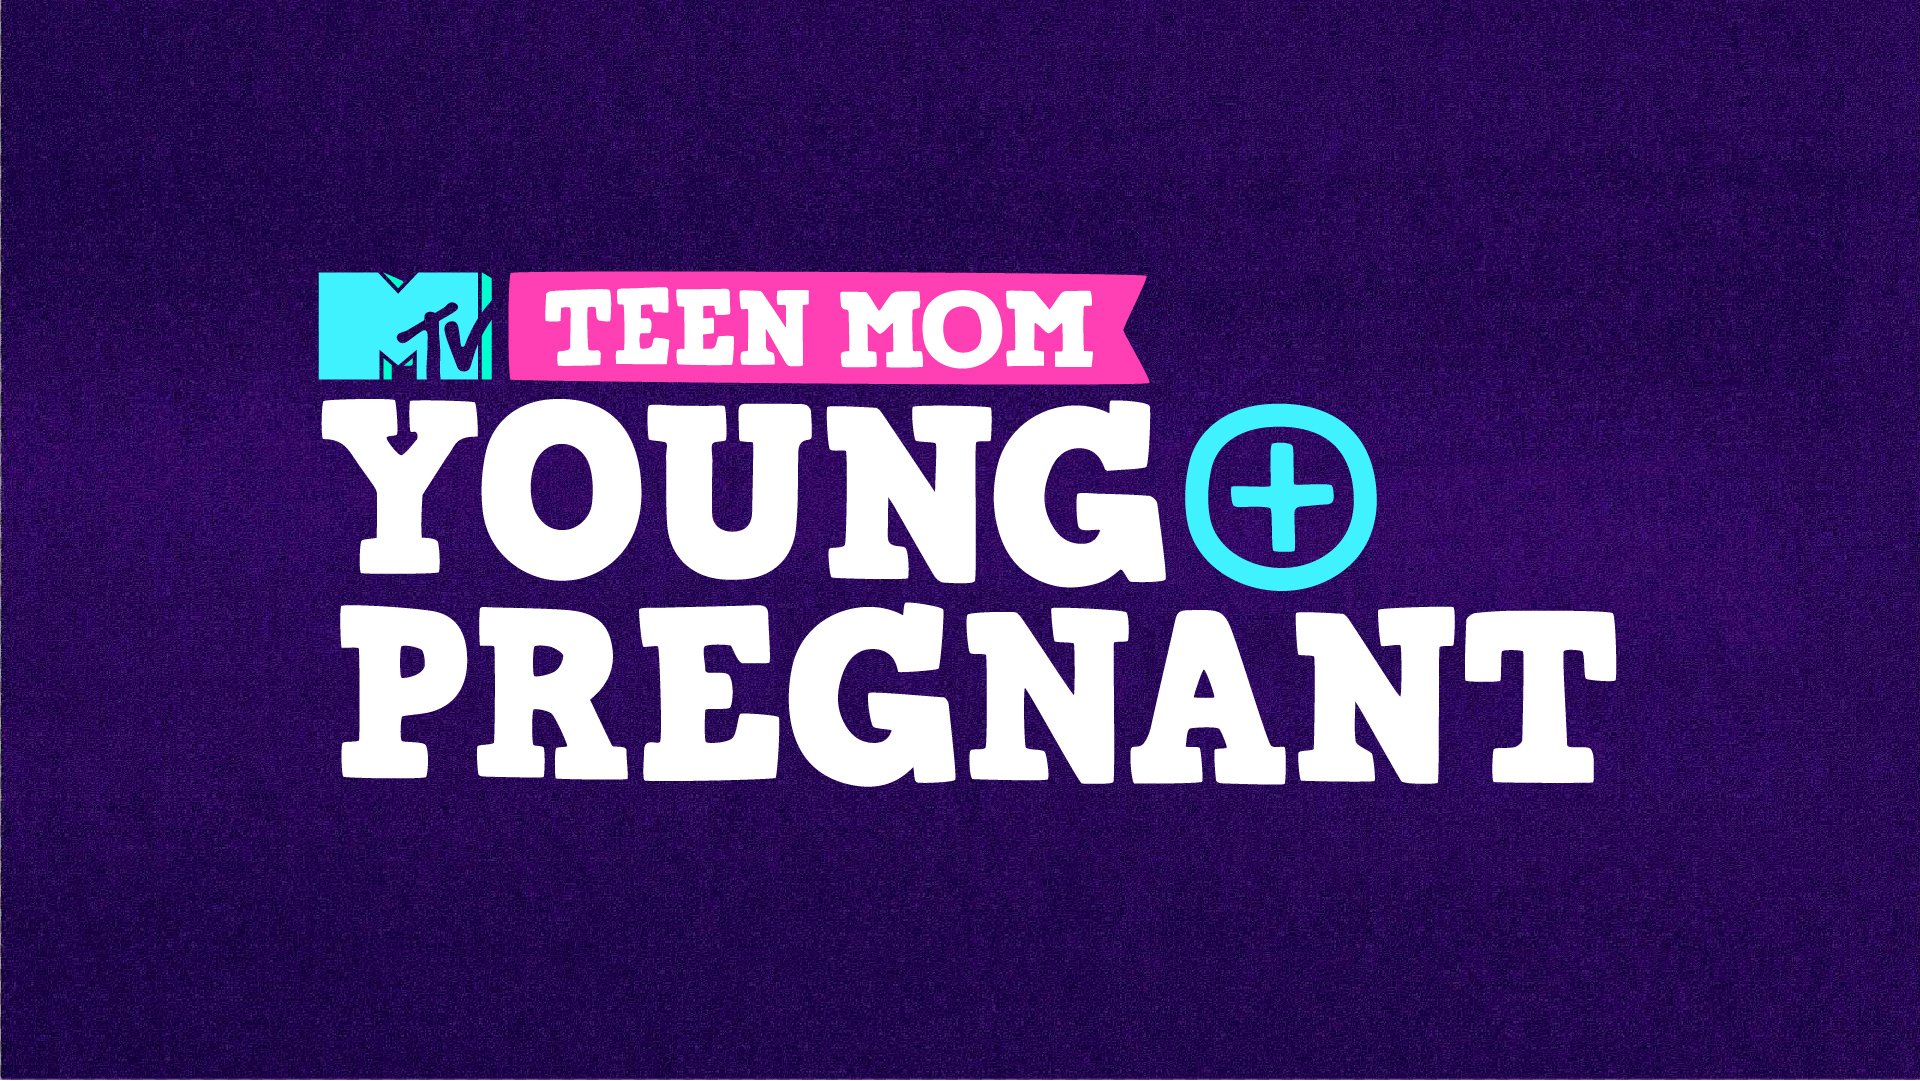 'Teen Mom: Young and Pregnant' logo